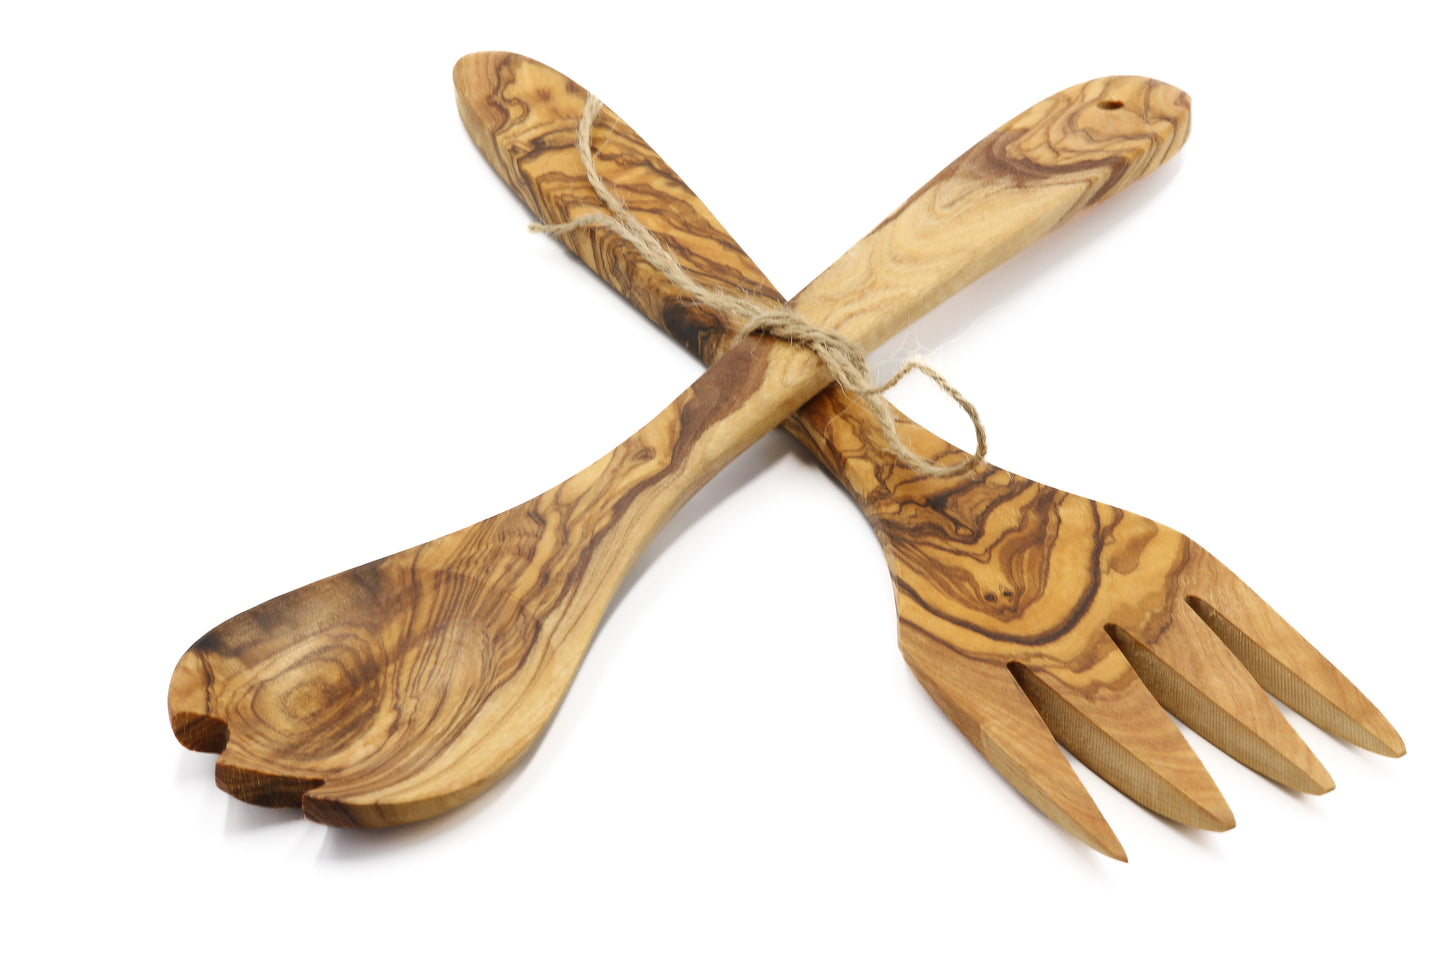 Artisan-made duo salad servers in beautiful olive wood